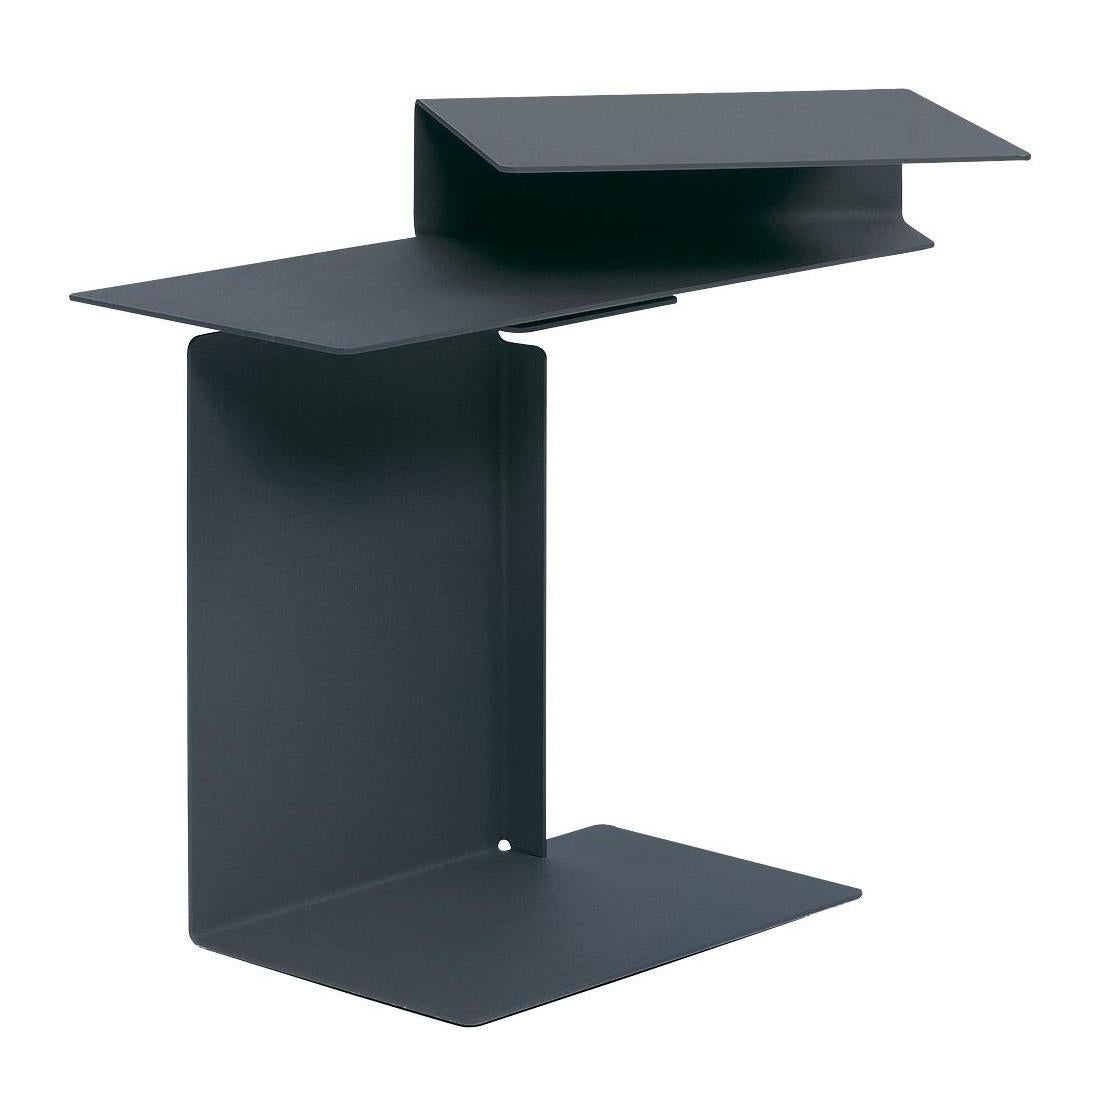 German Classicon Black Diana E side Table designed by Konstantin Grcic